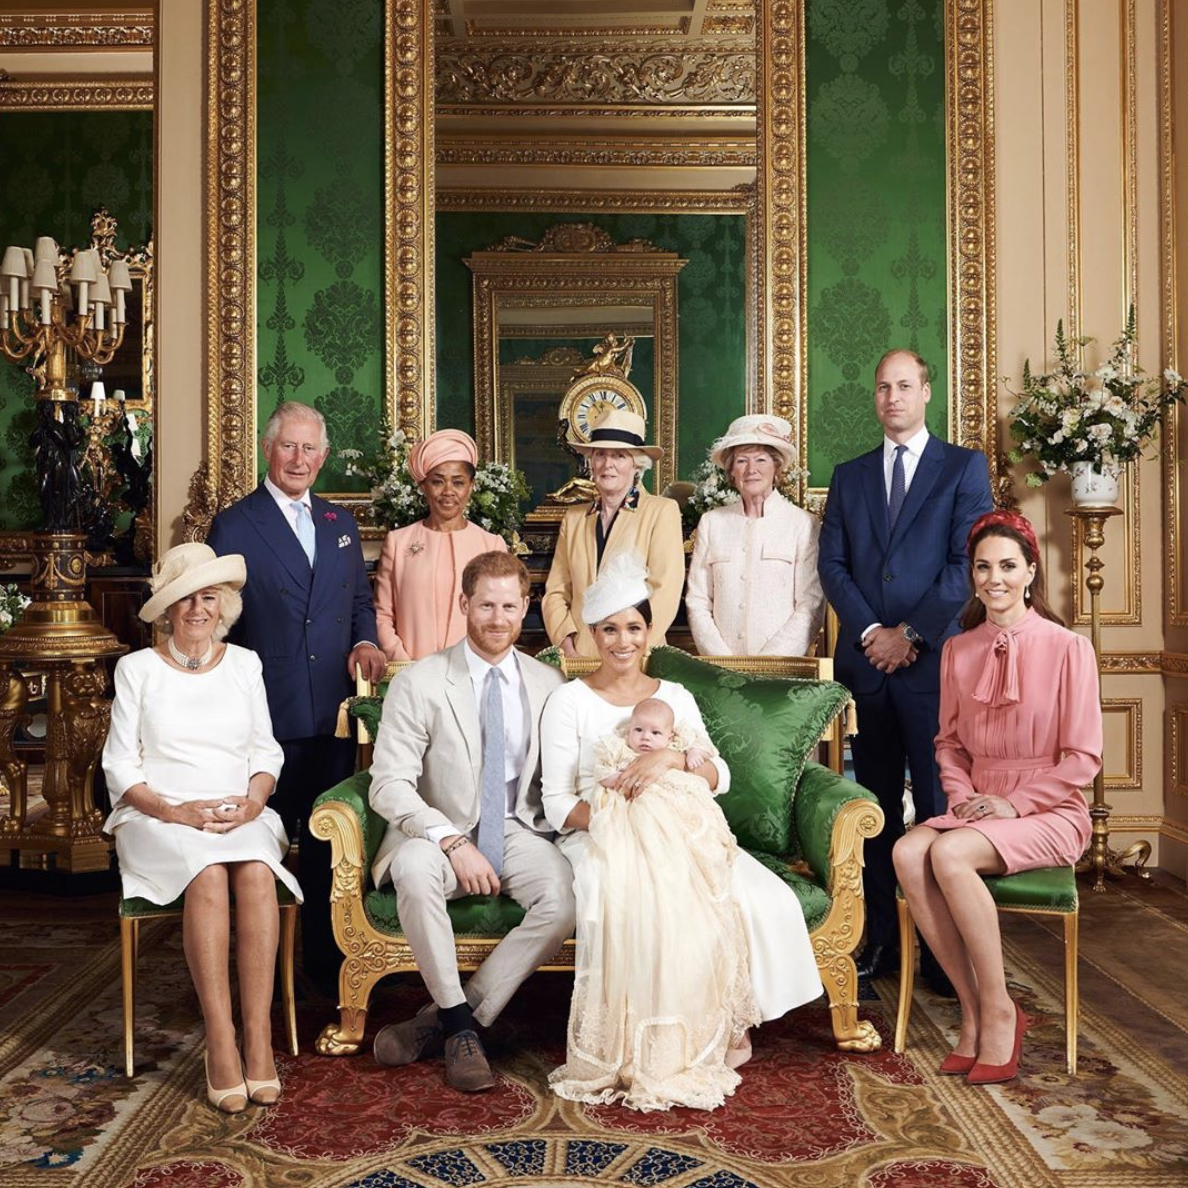 kate and william with archie, meghan, and harry